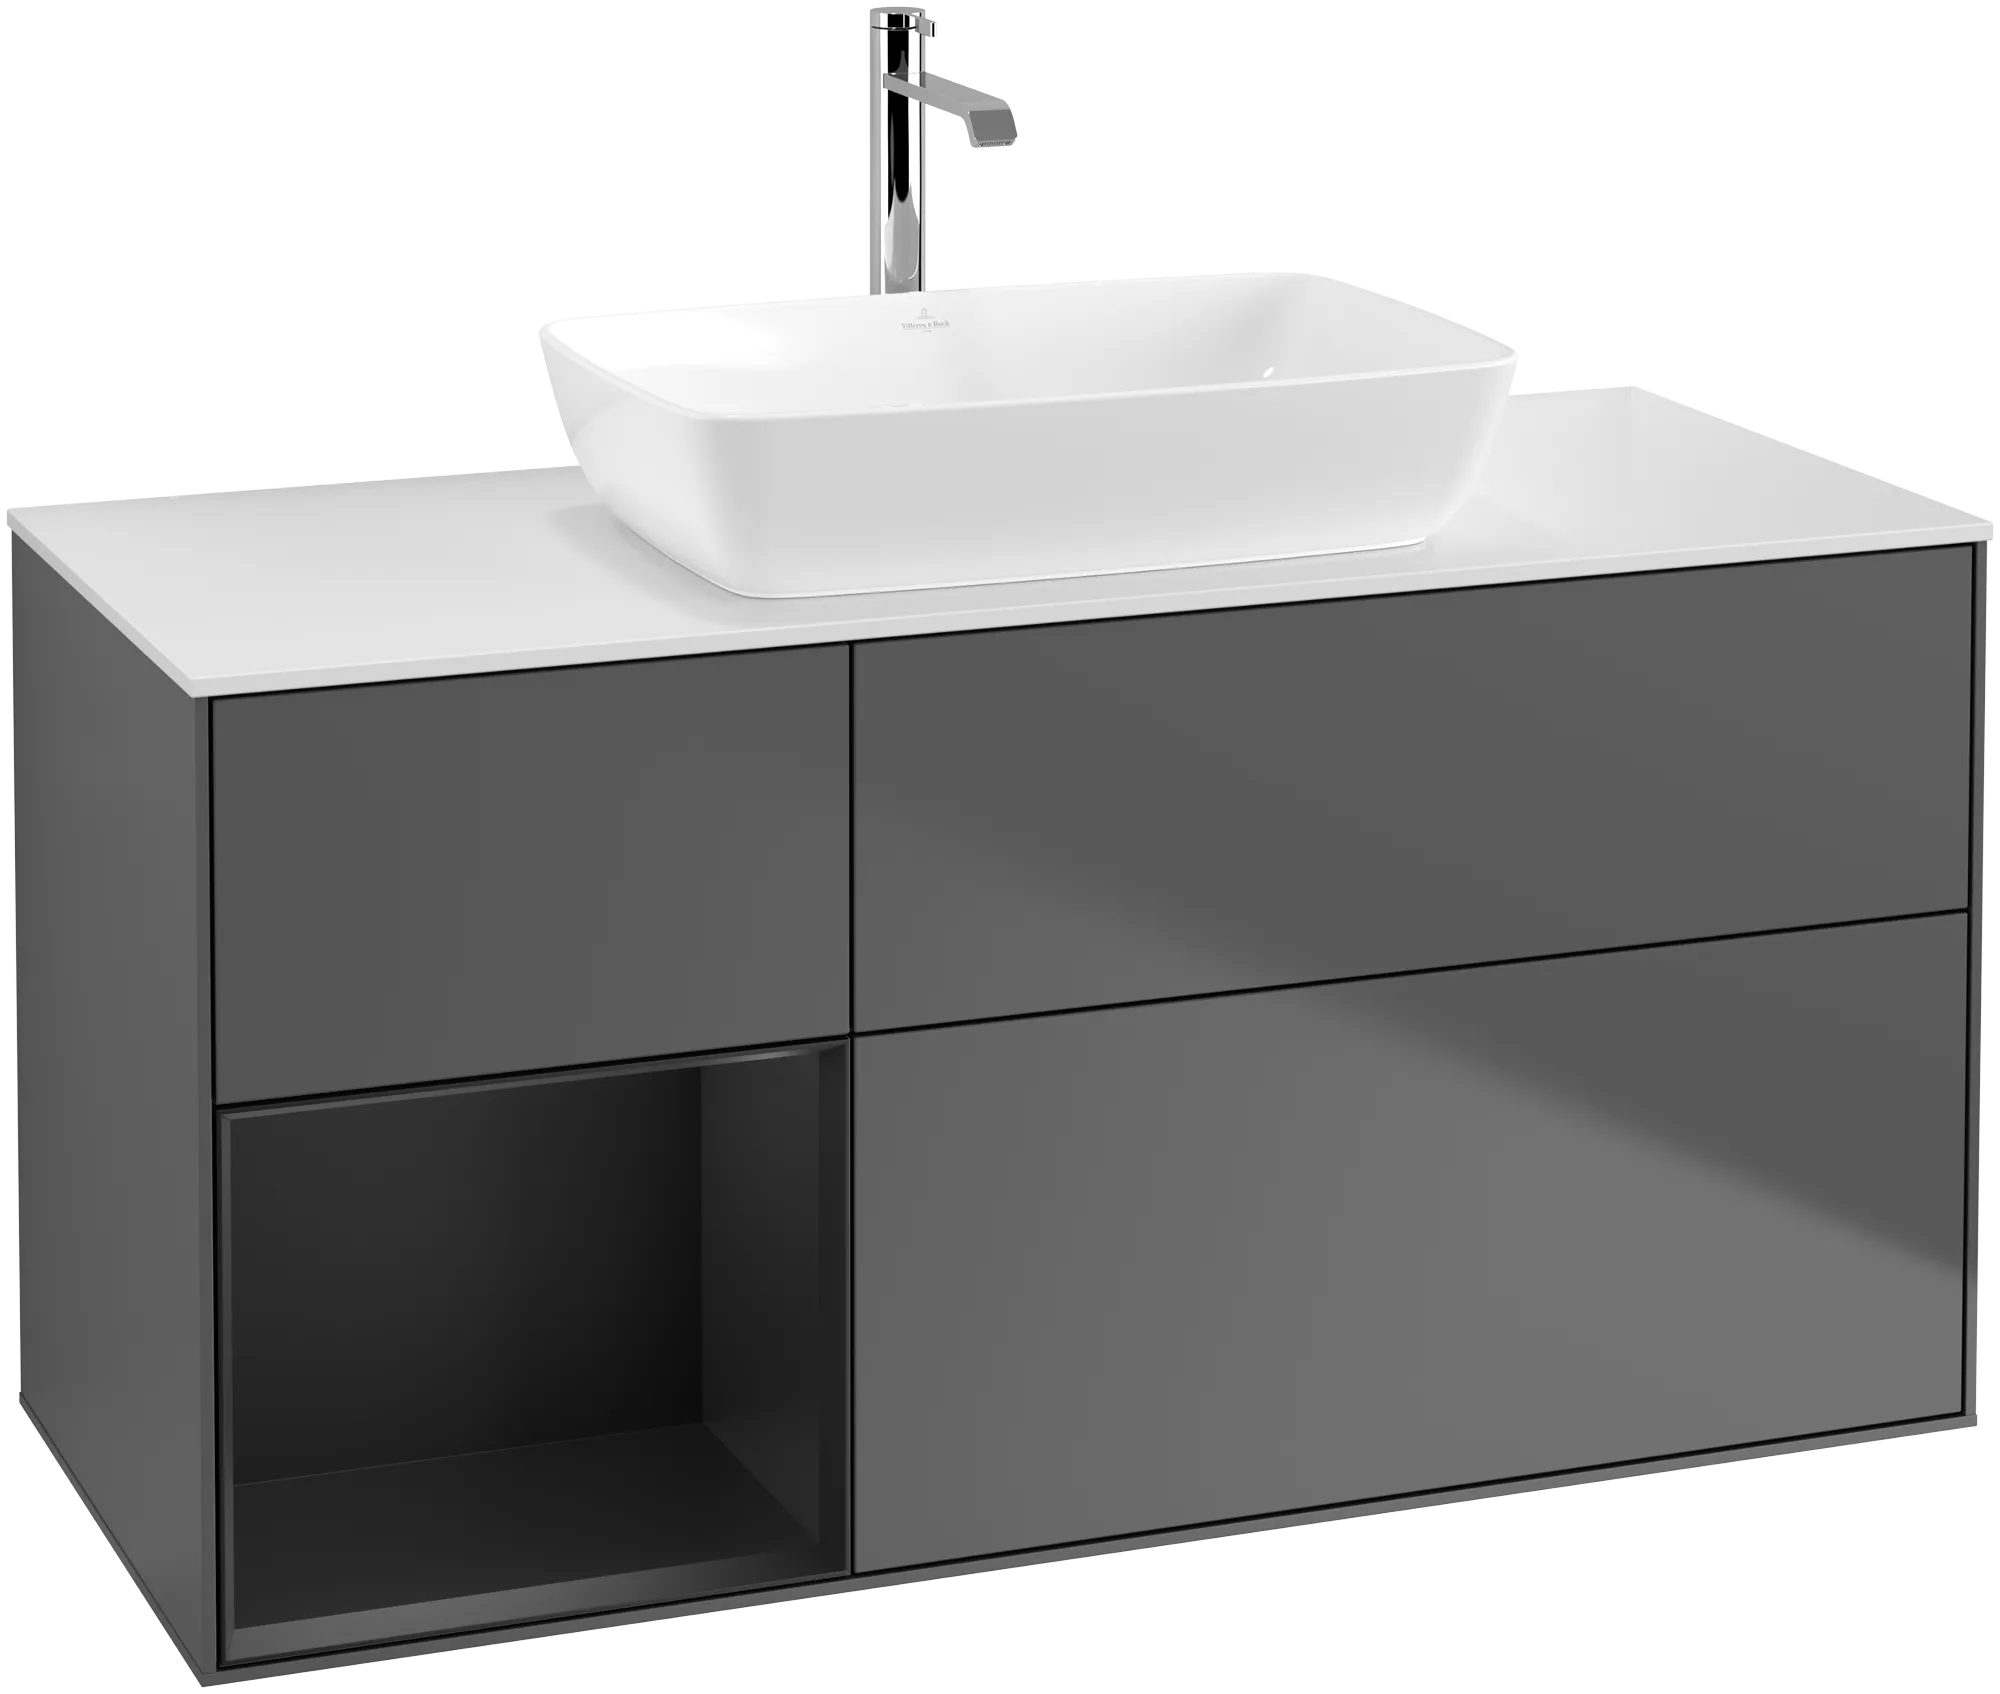 Picture of VILLEROY BOCH Finion Vanity unit, with lighting, 3 pull-out compartments, 1200 x 603 x 501 mm, Anthracite Matt Lacquer / Black Matt Lacquer / Glass White Matt #G821PDGK